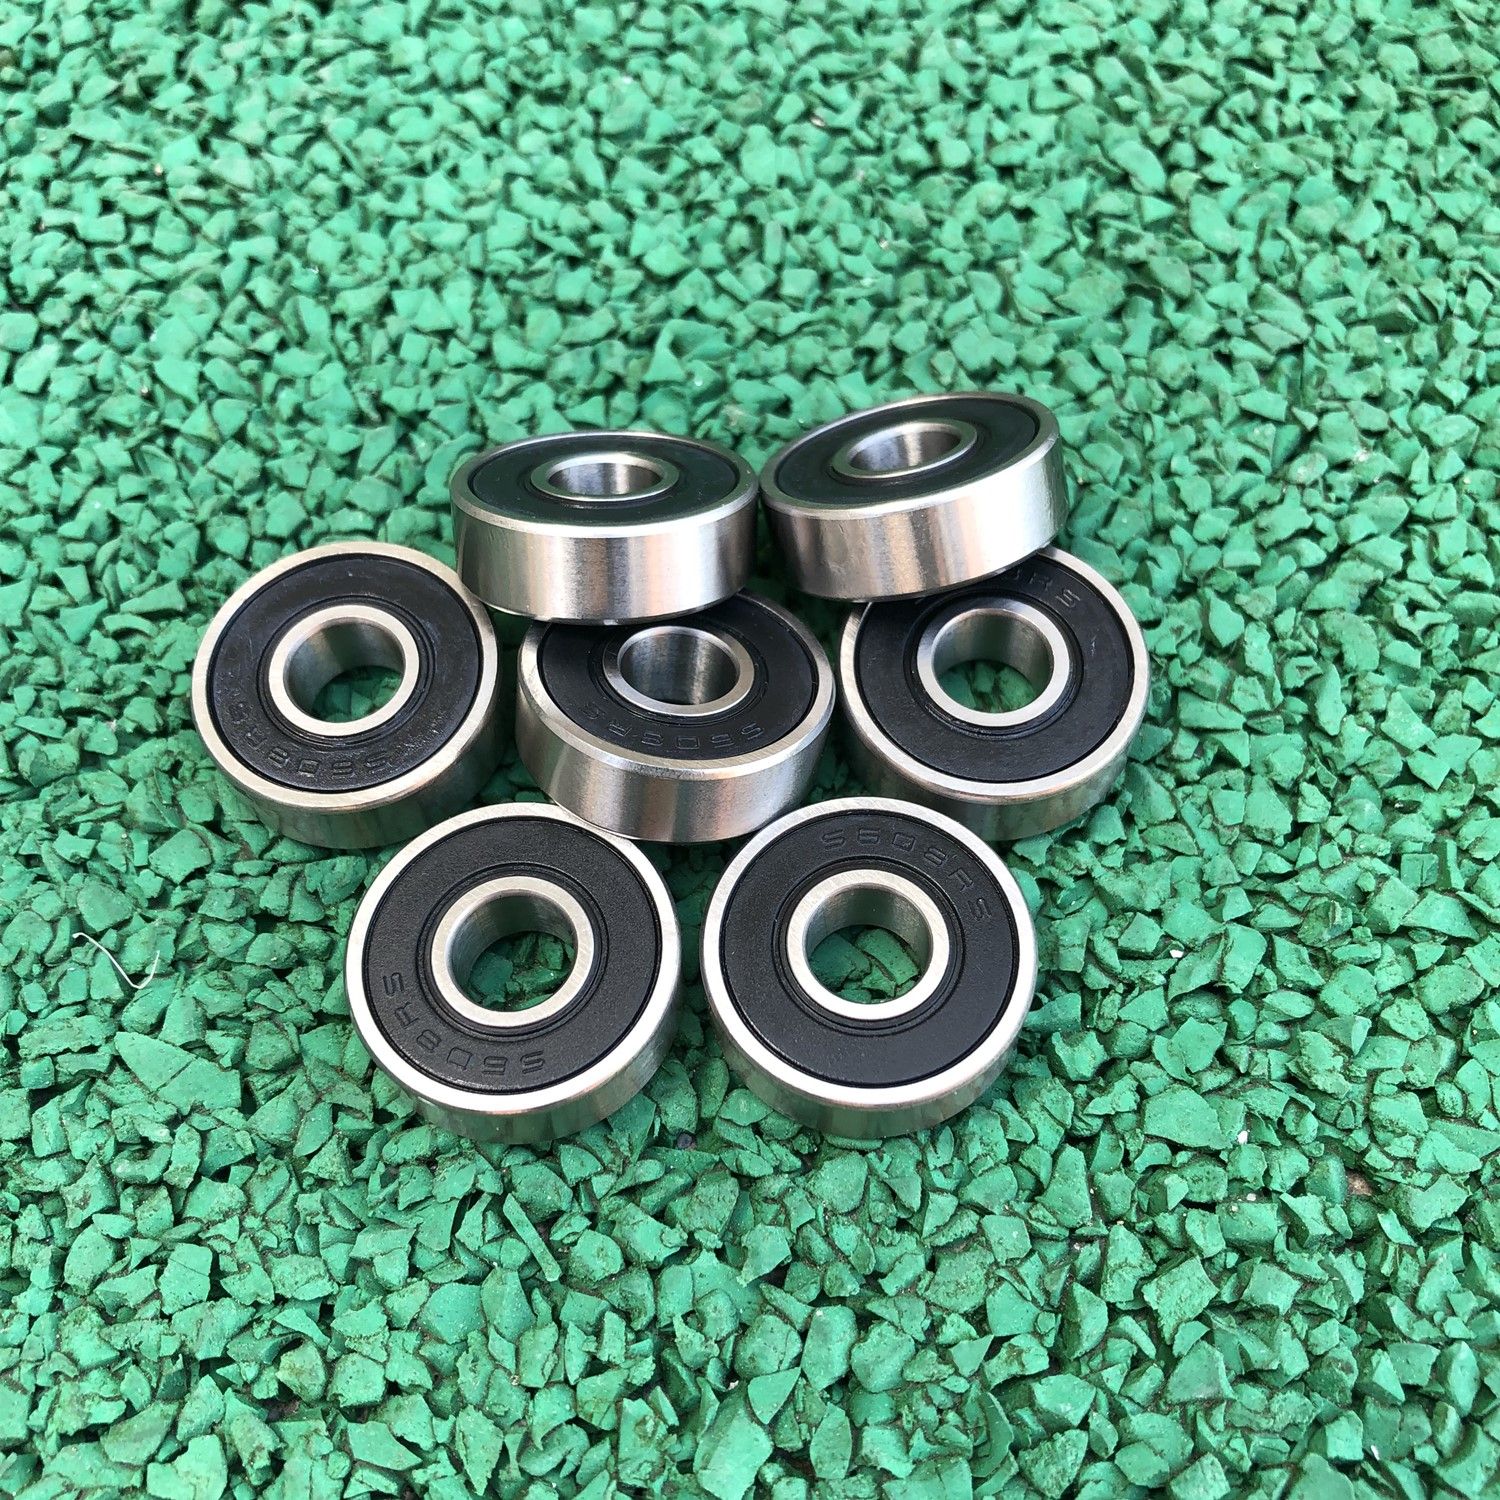 8 PCS S608 2RS All Weather Stainless Skate Bearings oil lube less drag